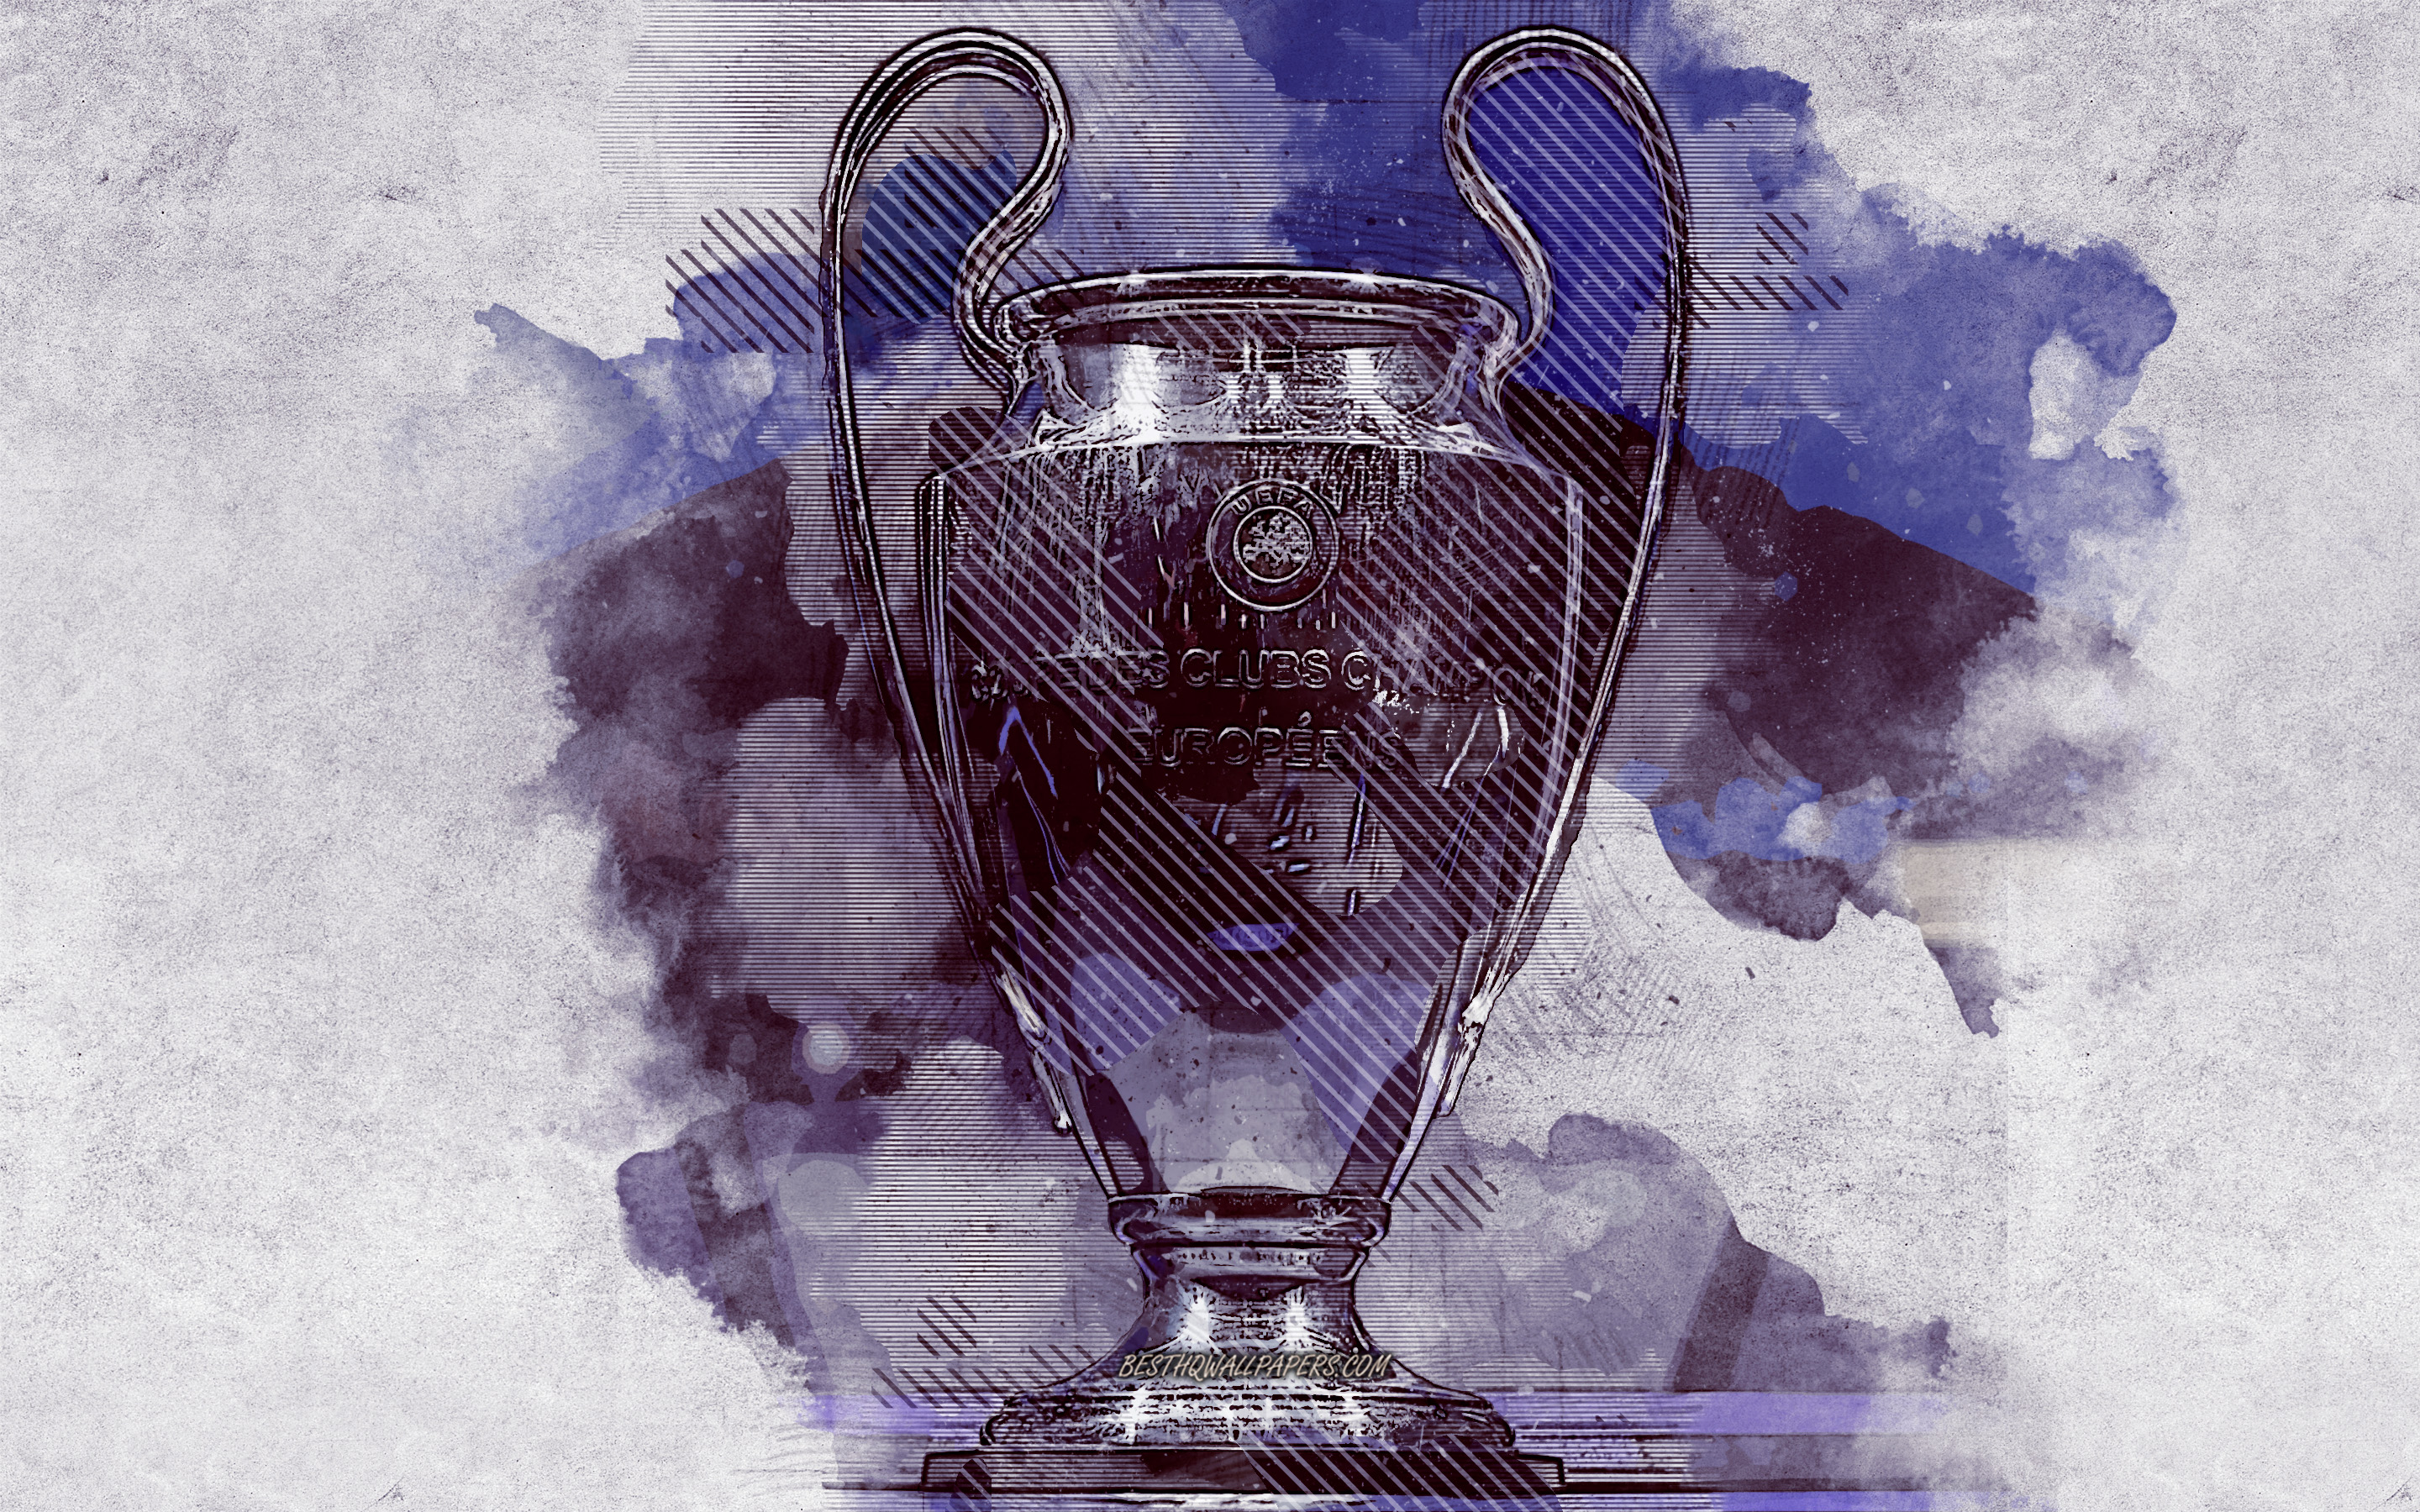 Download wallpaper Champions League Cup, grunge art, sports trophy, creative art, football, Europe, soccer tournament, European Champion Clubs Cup, UEFA Champions League for desktop with resolution 2880x1800. High Quality HD picture wallpaper